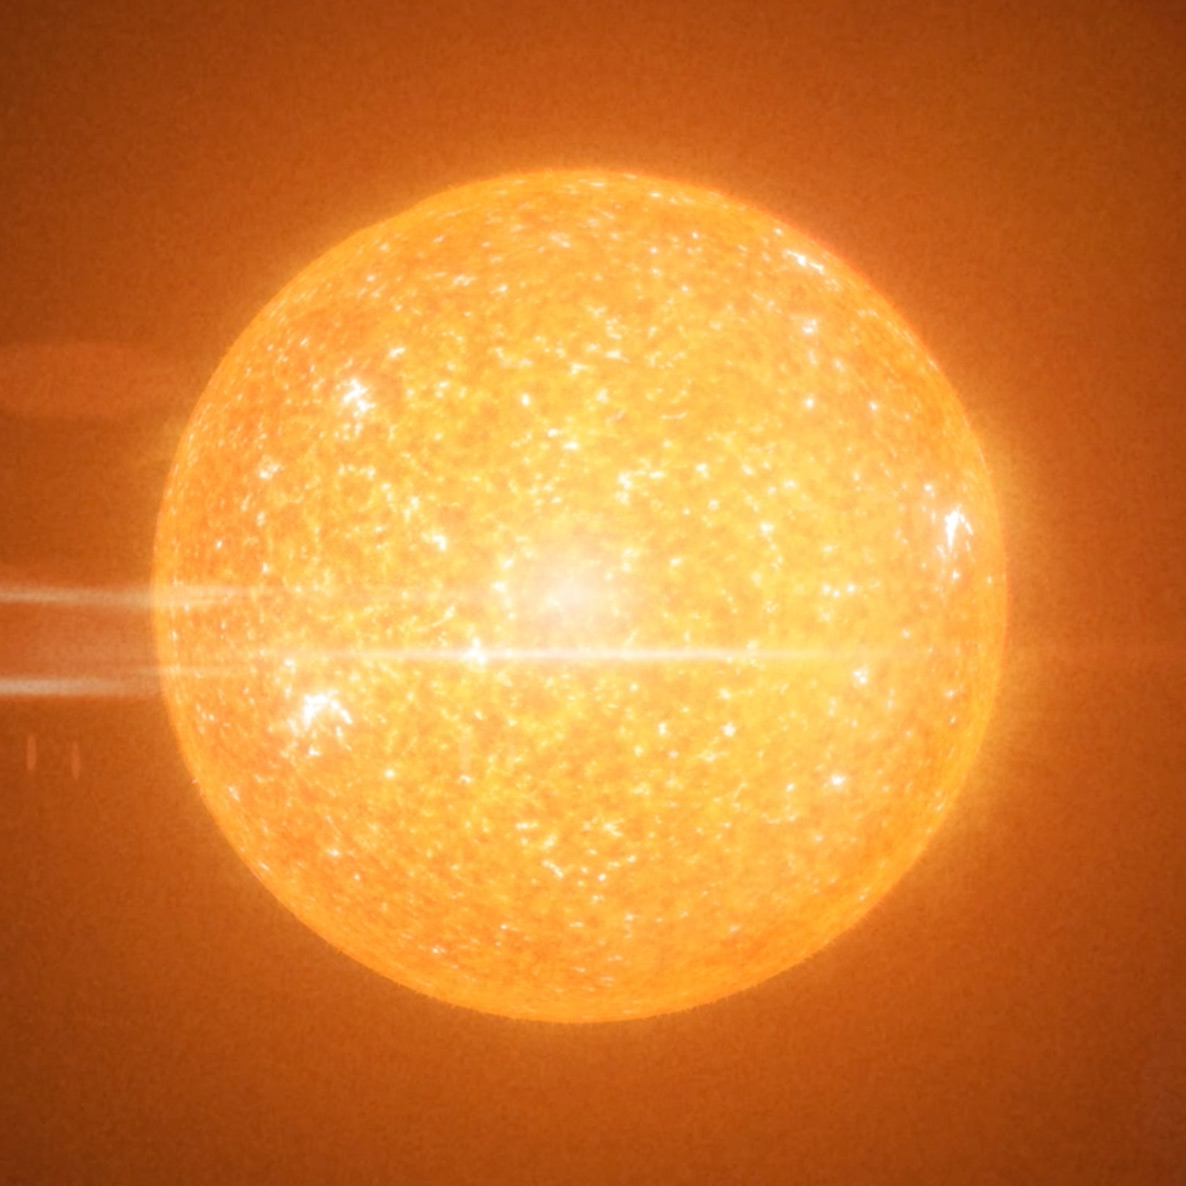 Artist's concept of a red giant star.